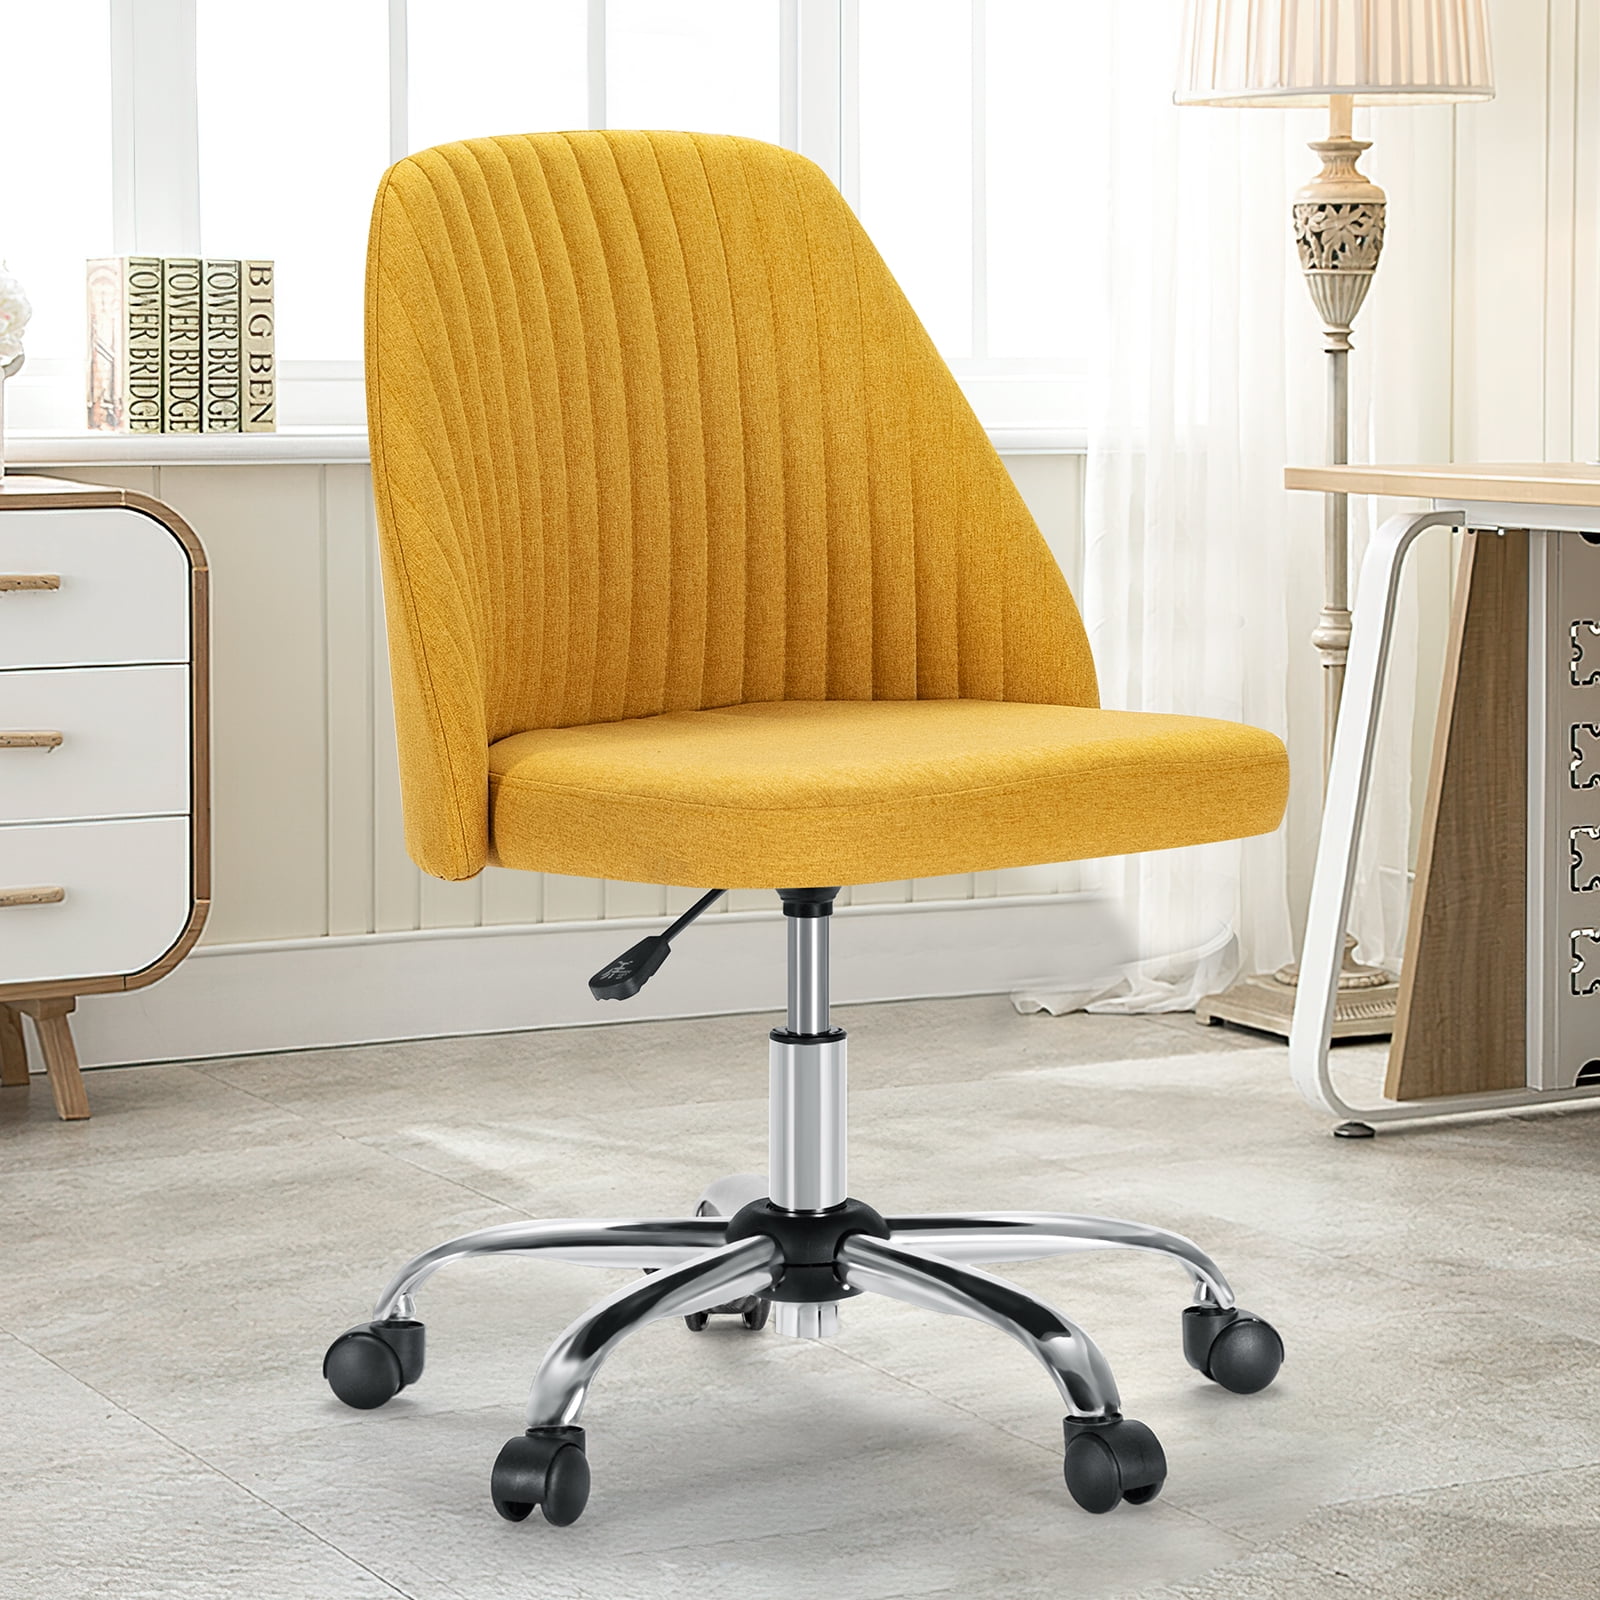 Cute Chair with Wheels for Bedroom, Home Office Desk Chair, Mid